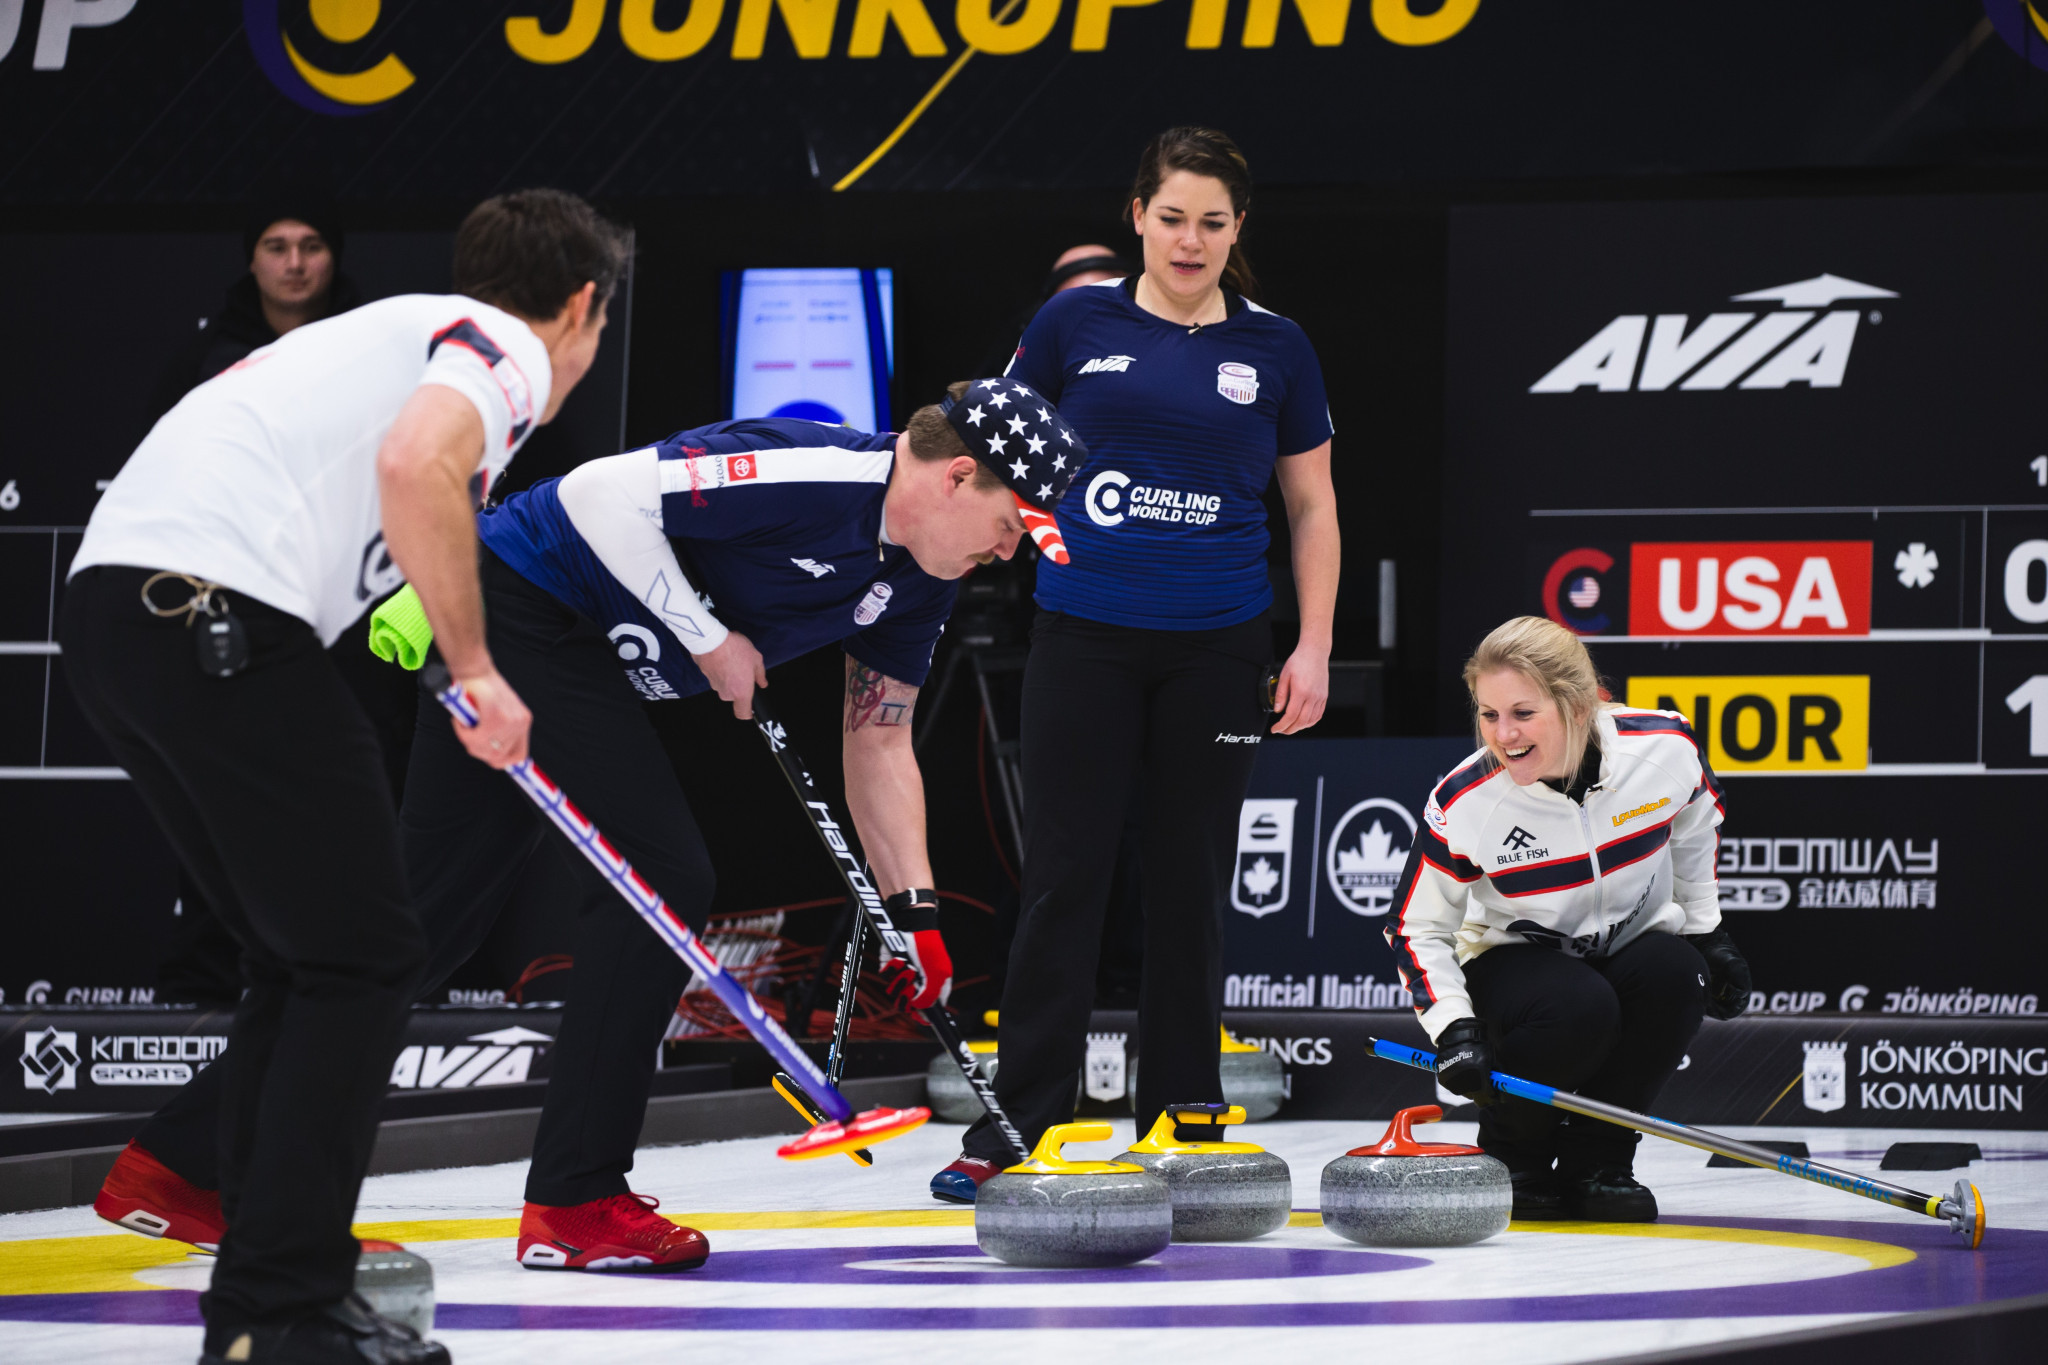 Norway's Thomas Ulsrud and Kristin Skaslien beat the American pair of Becca Hamilton and Matt Hamilton 8-5 in the mixed doubles event at the Curling World Cup ©World Curling Federation 